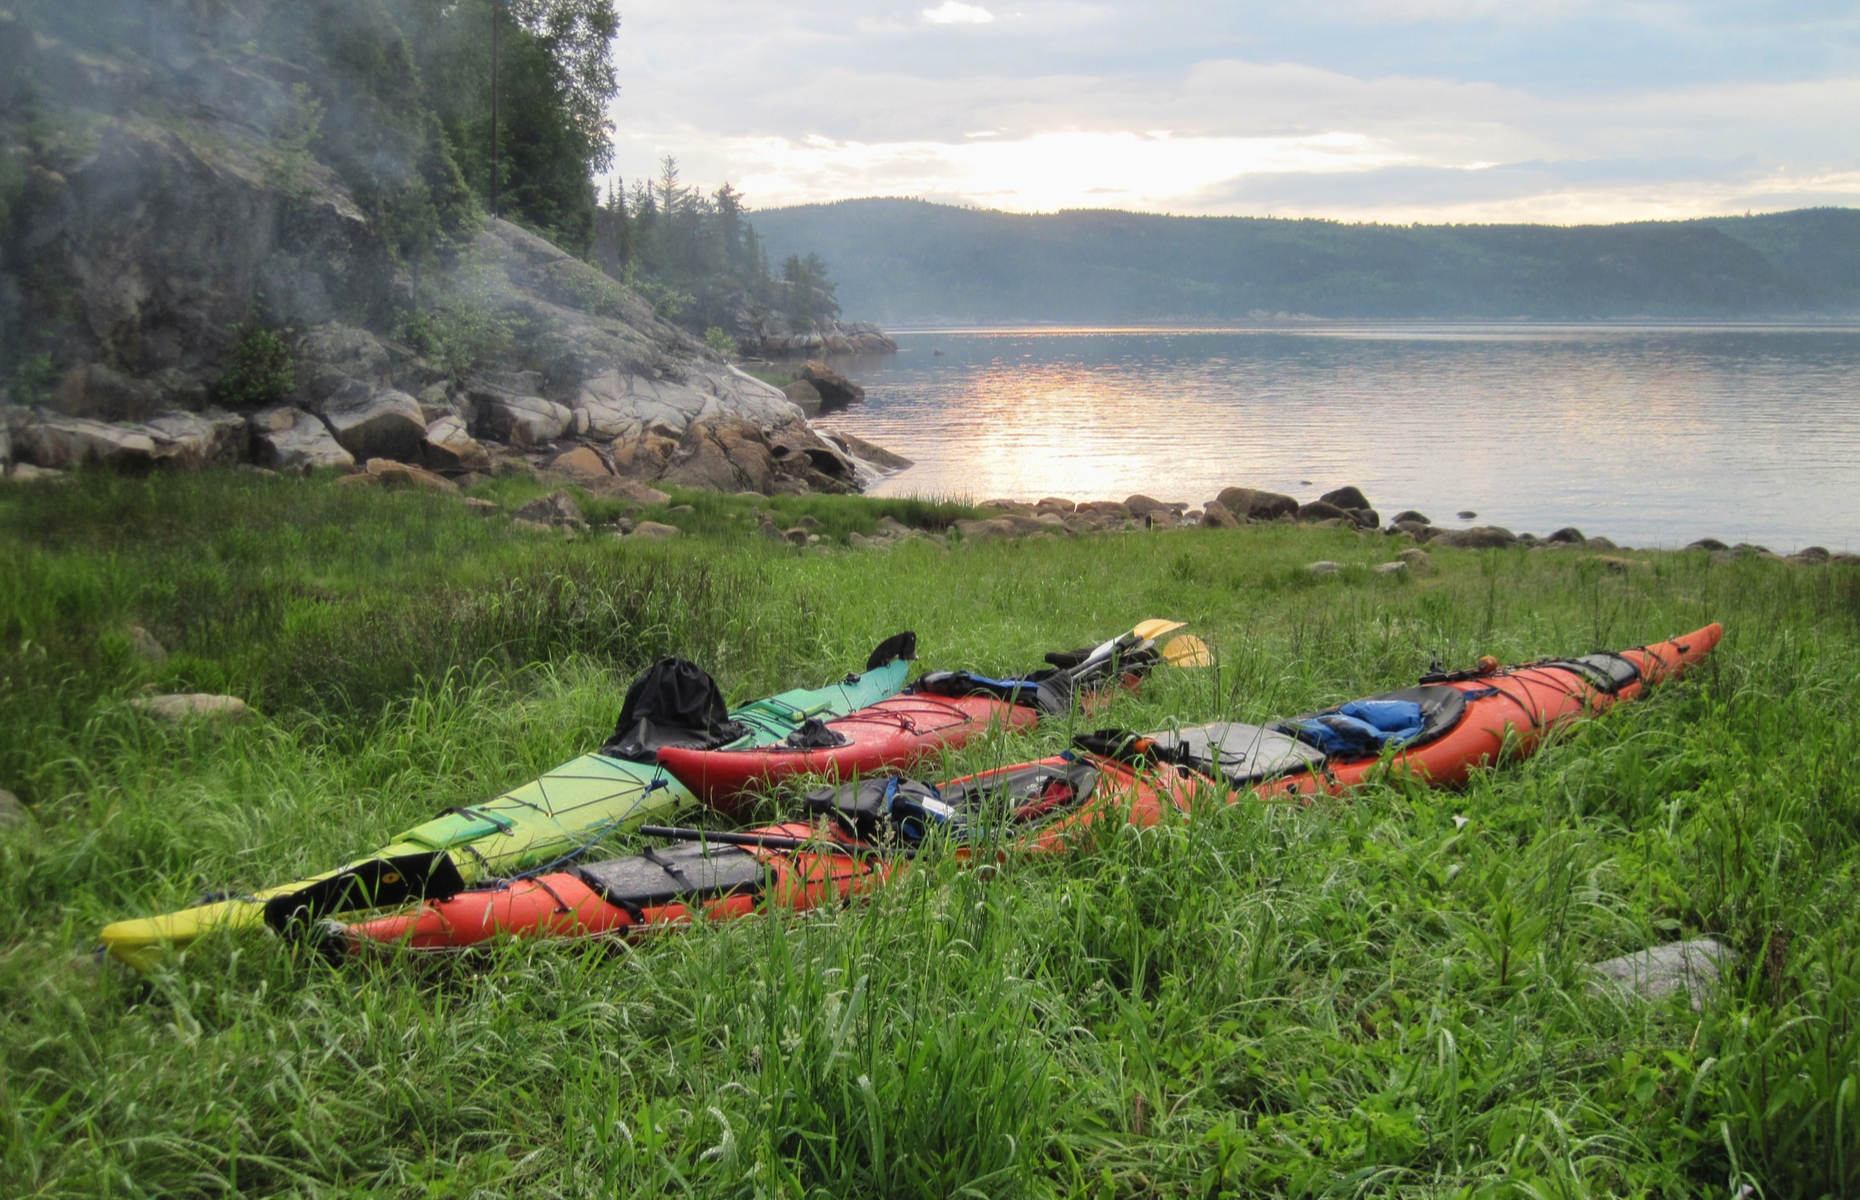 Canoes in Saguenay Fjord National Park (Image: ian Tessier/Shutterstock)